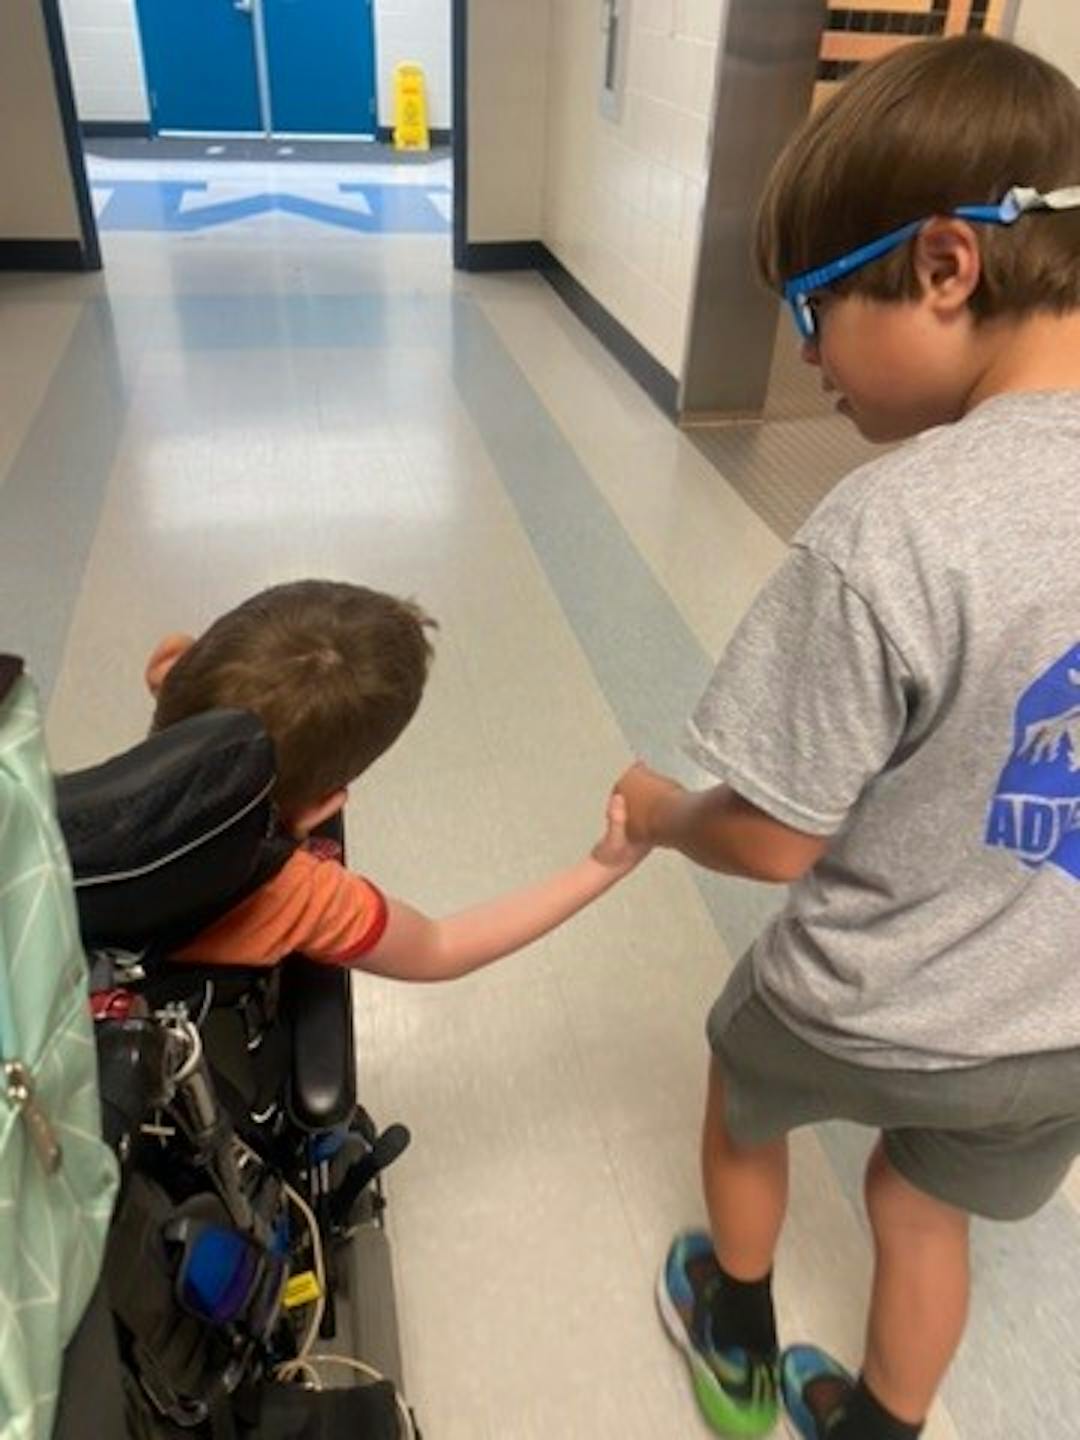 Shows a boy holding hands and helping another boy who is in a wheelchair.